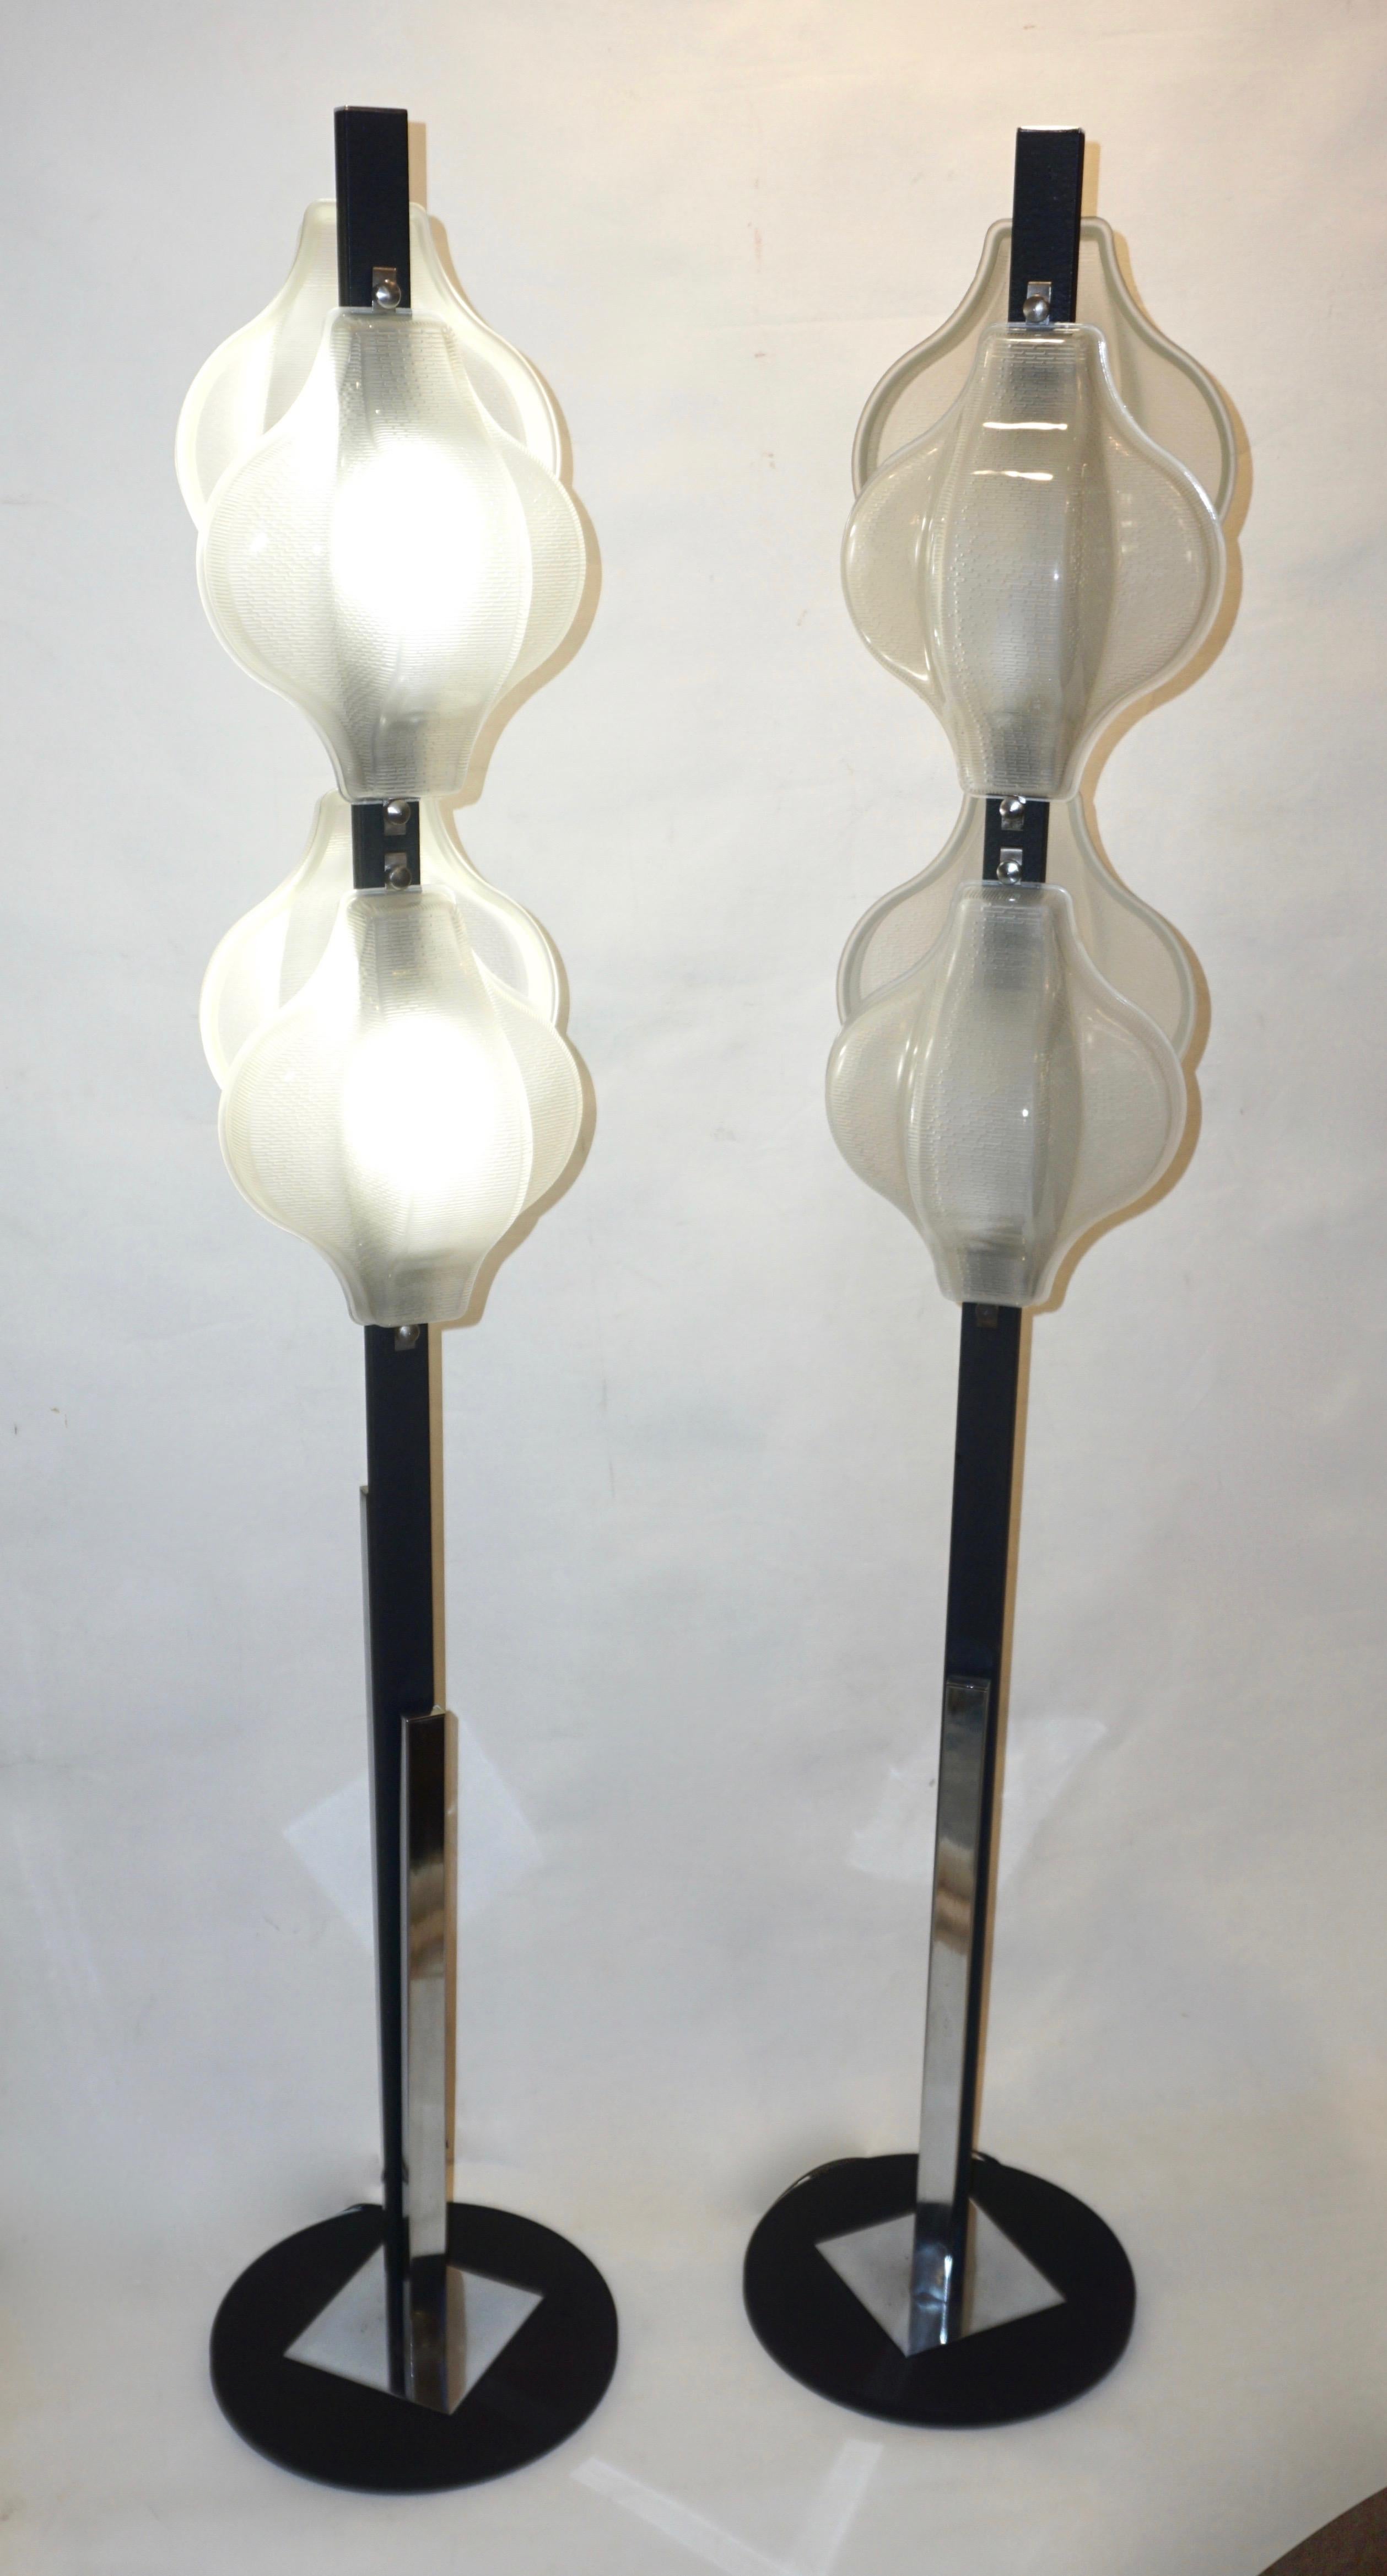 1960s Italian Pair of Minimalist White and Black Organic Chrome Floor Lamps For Sale 4